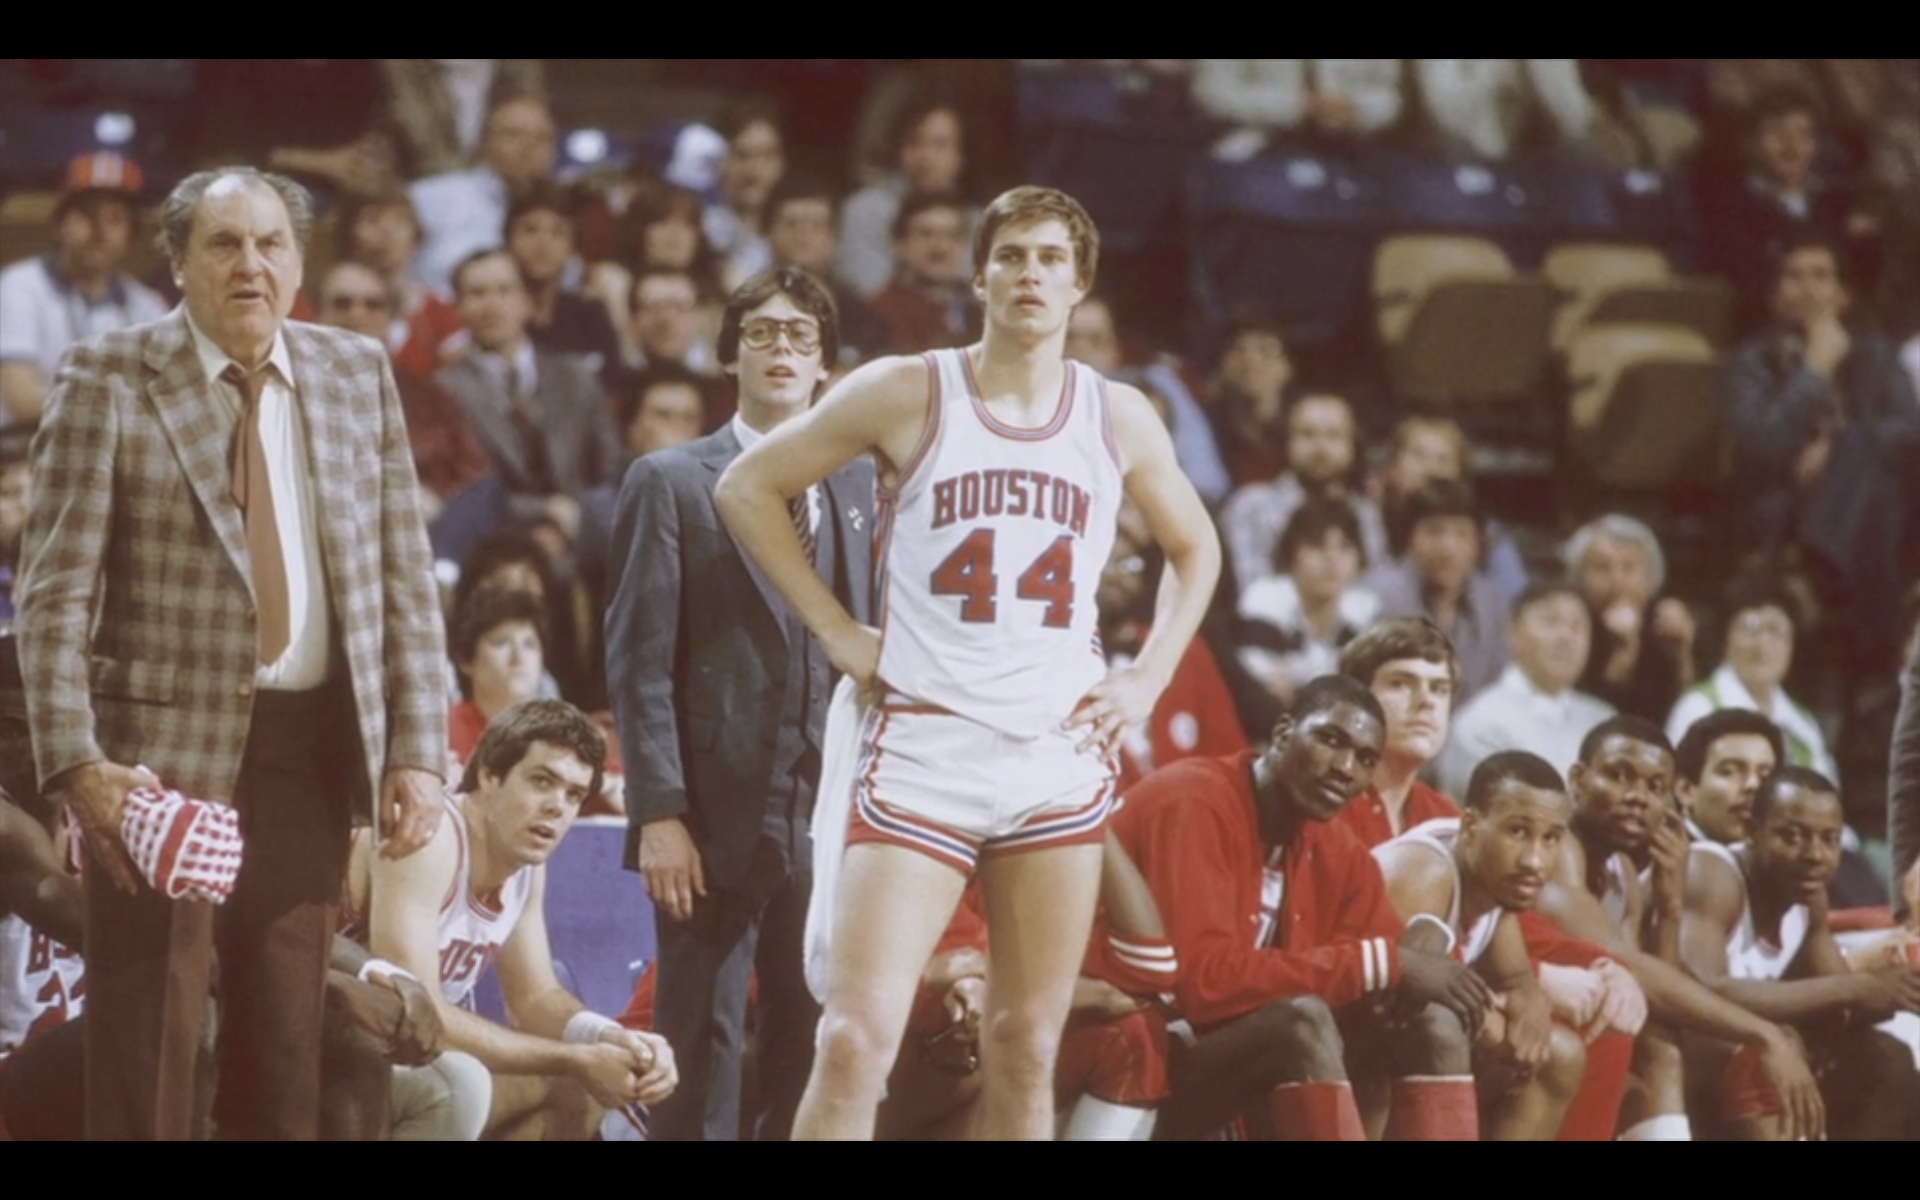 Before 30 for 30 film's debut tonight, ESPN's Gettys relives his Phi Slama Jama days ...